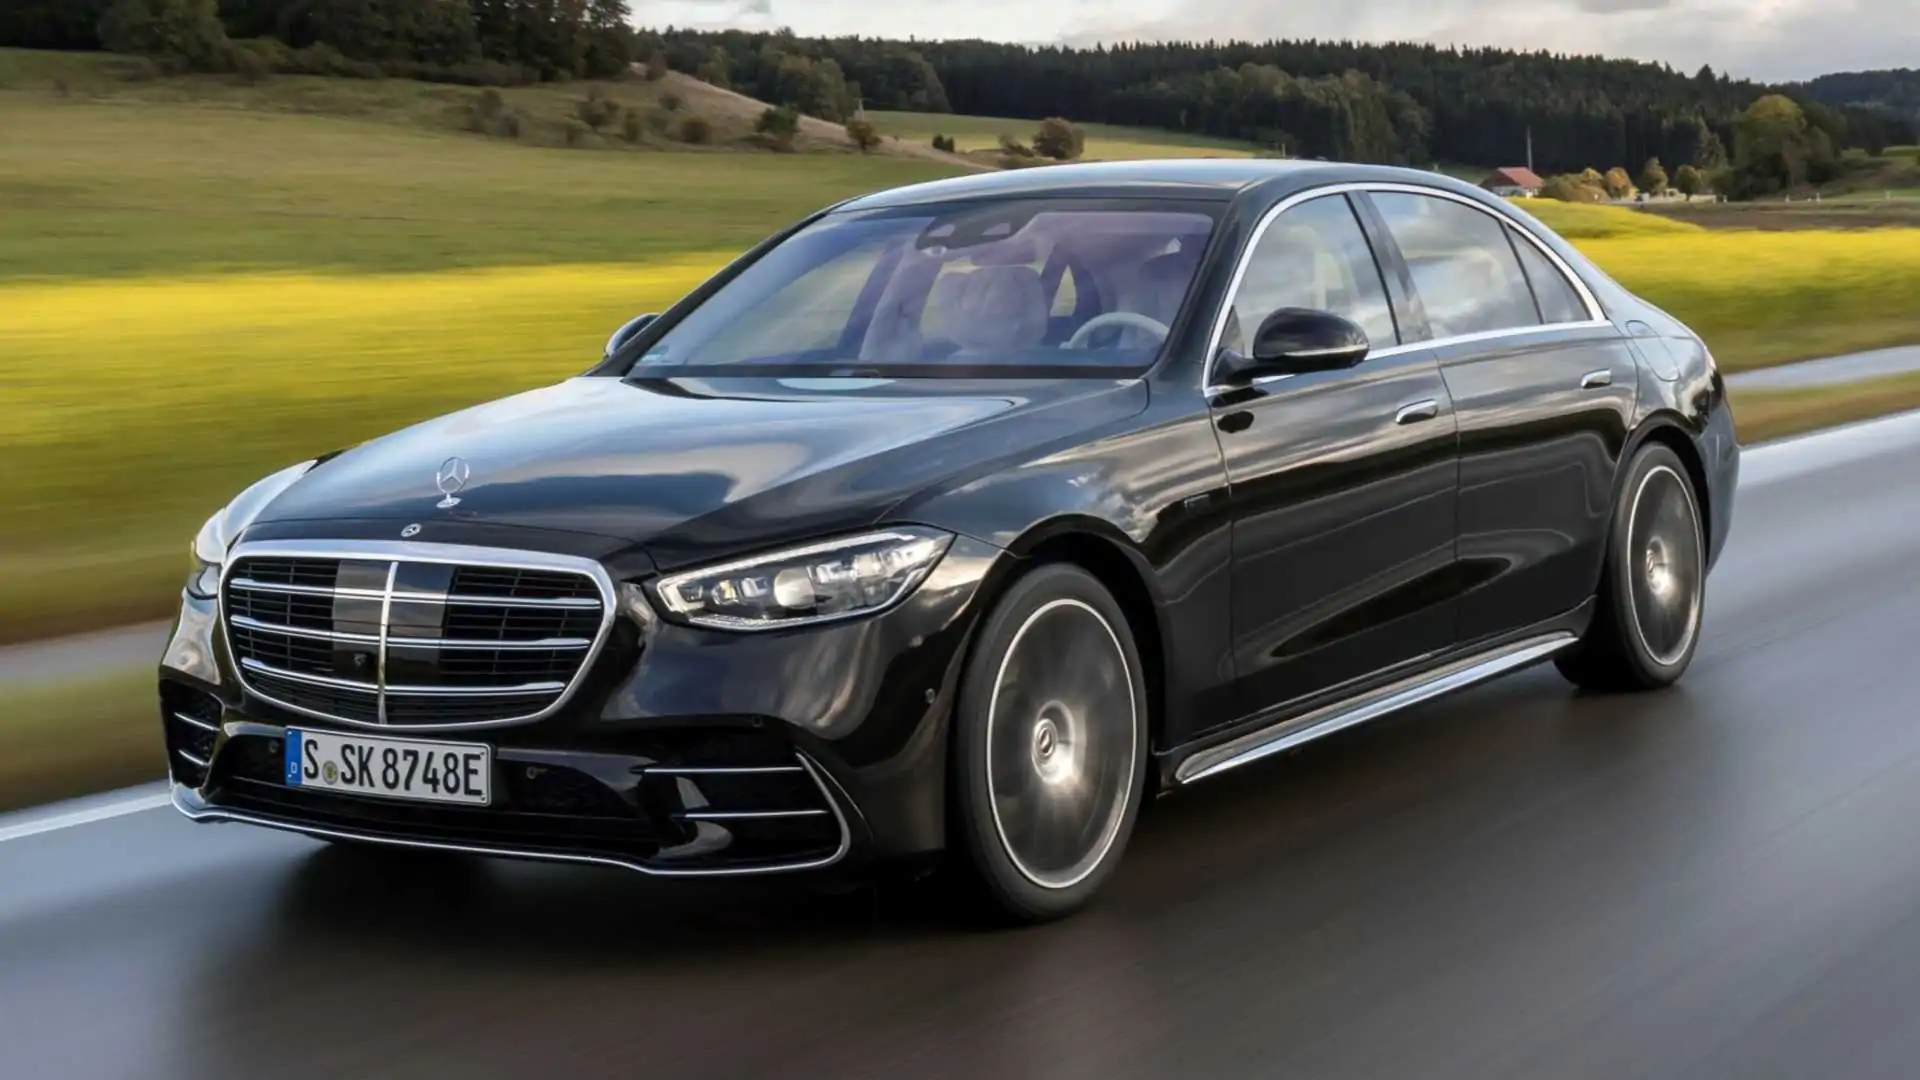 Mercedes S Class Coupe Generations - Mercedes Benz - Timeline